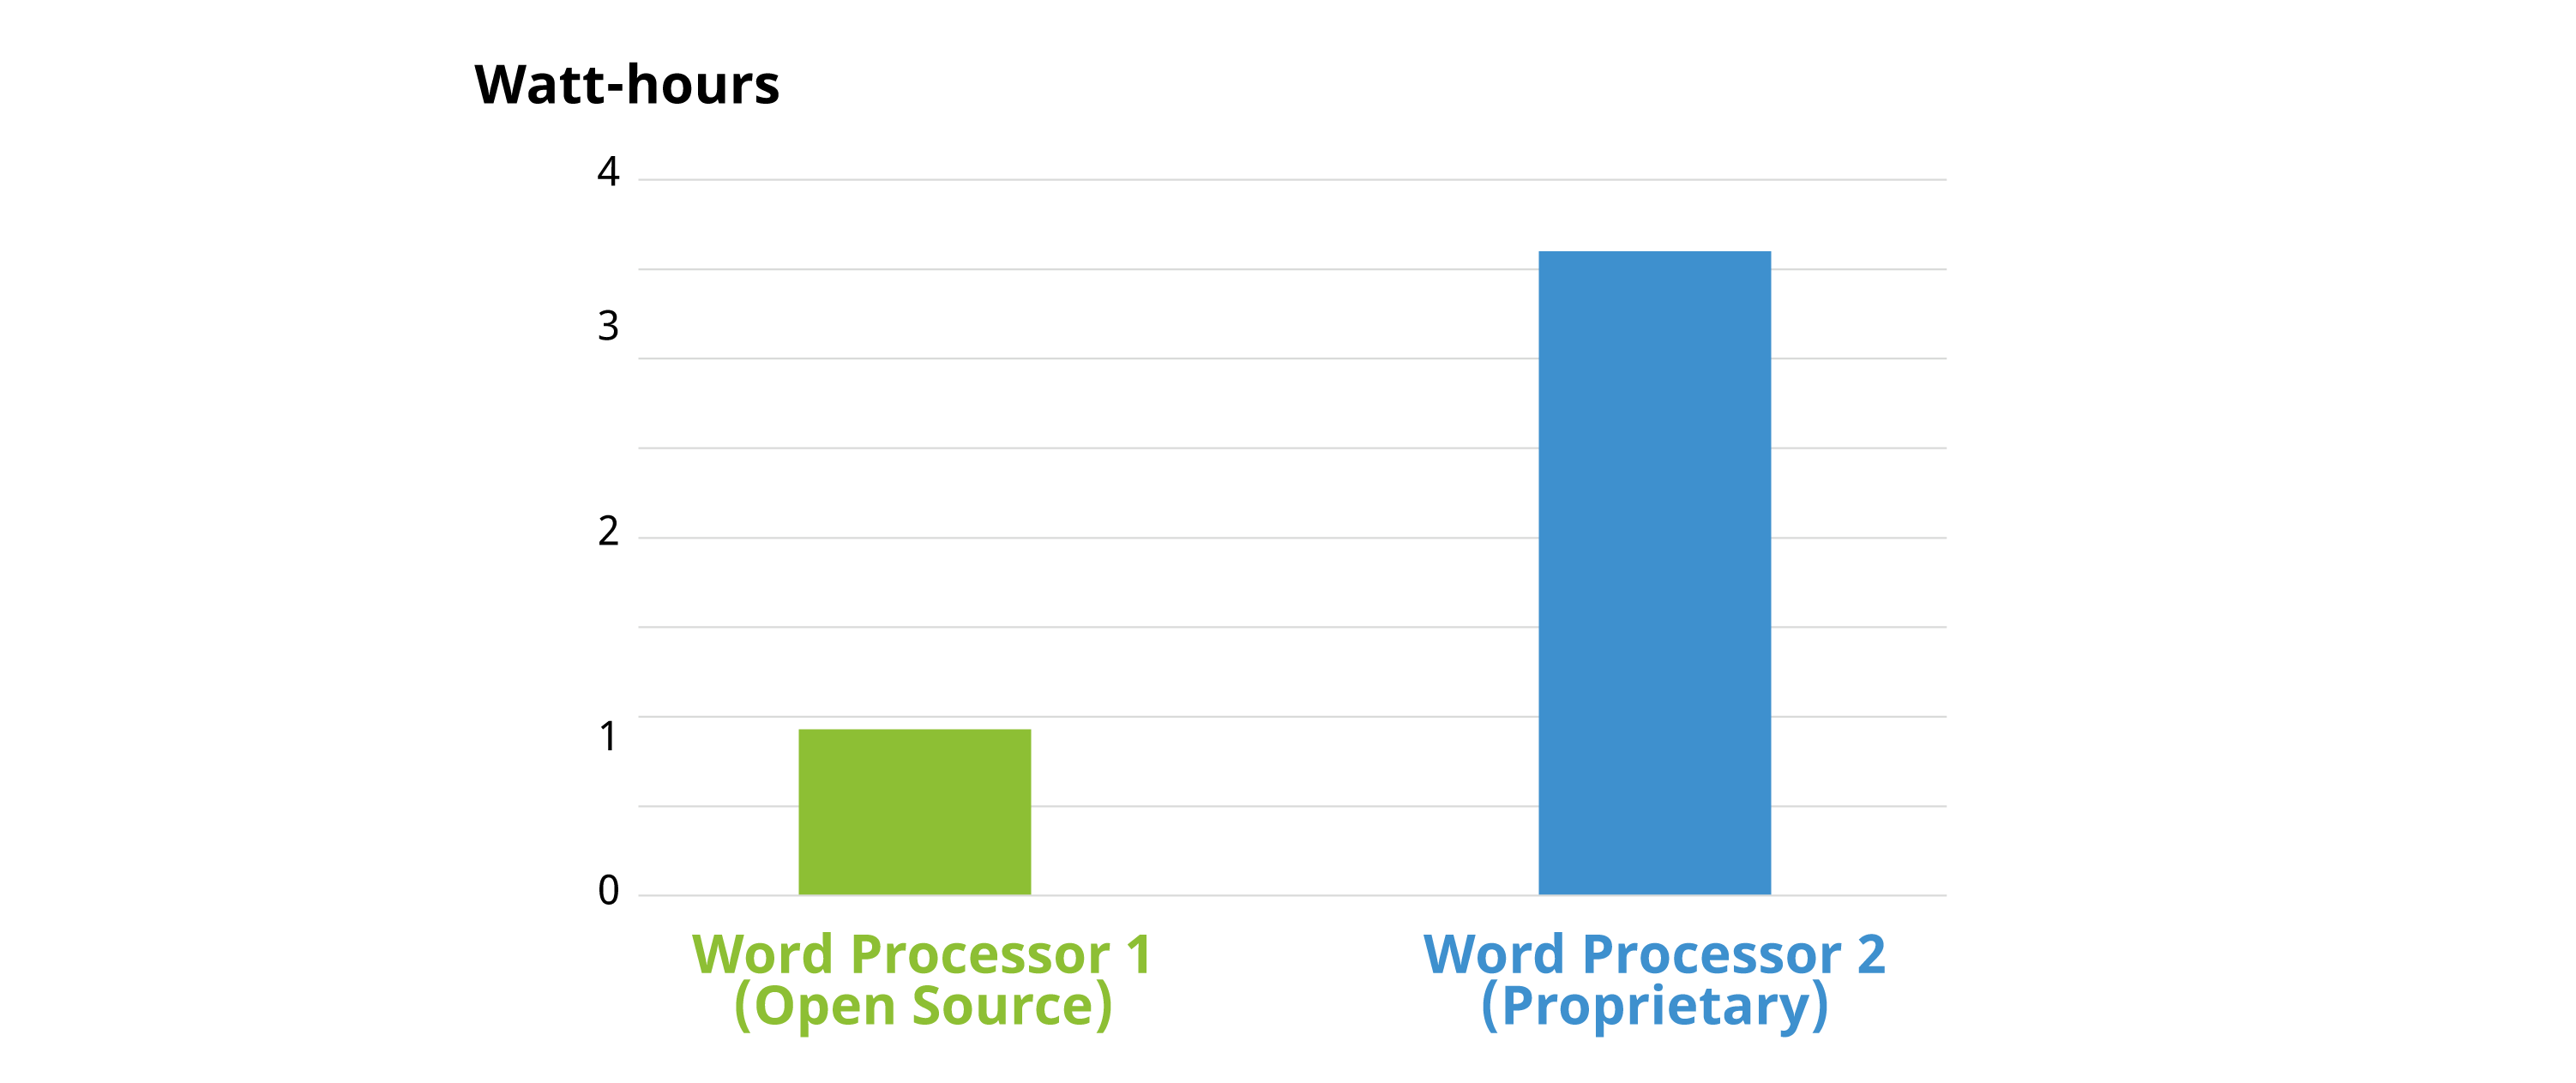 Plot comparing two word processors during execution of a Standard Usage Scenario script. Word Processor 1 is an Open Source program. This word processor consumed four times <em>less</em> energy than Word Processor 2, a proprietary program. (Image from KDE published under a <a href="https://spdx.org/licenses/CC-BY-SA-4.0.html">CC-BY-SA-4.0</a> license. The image is adapted from Figure 1 on page 24 in the German Environment Agency report.)